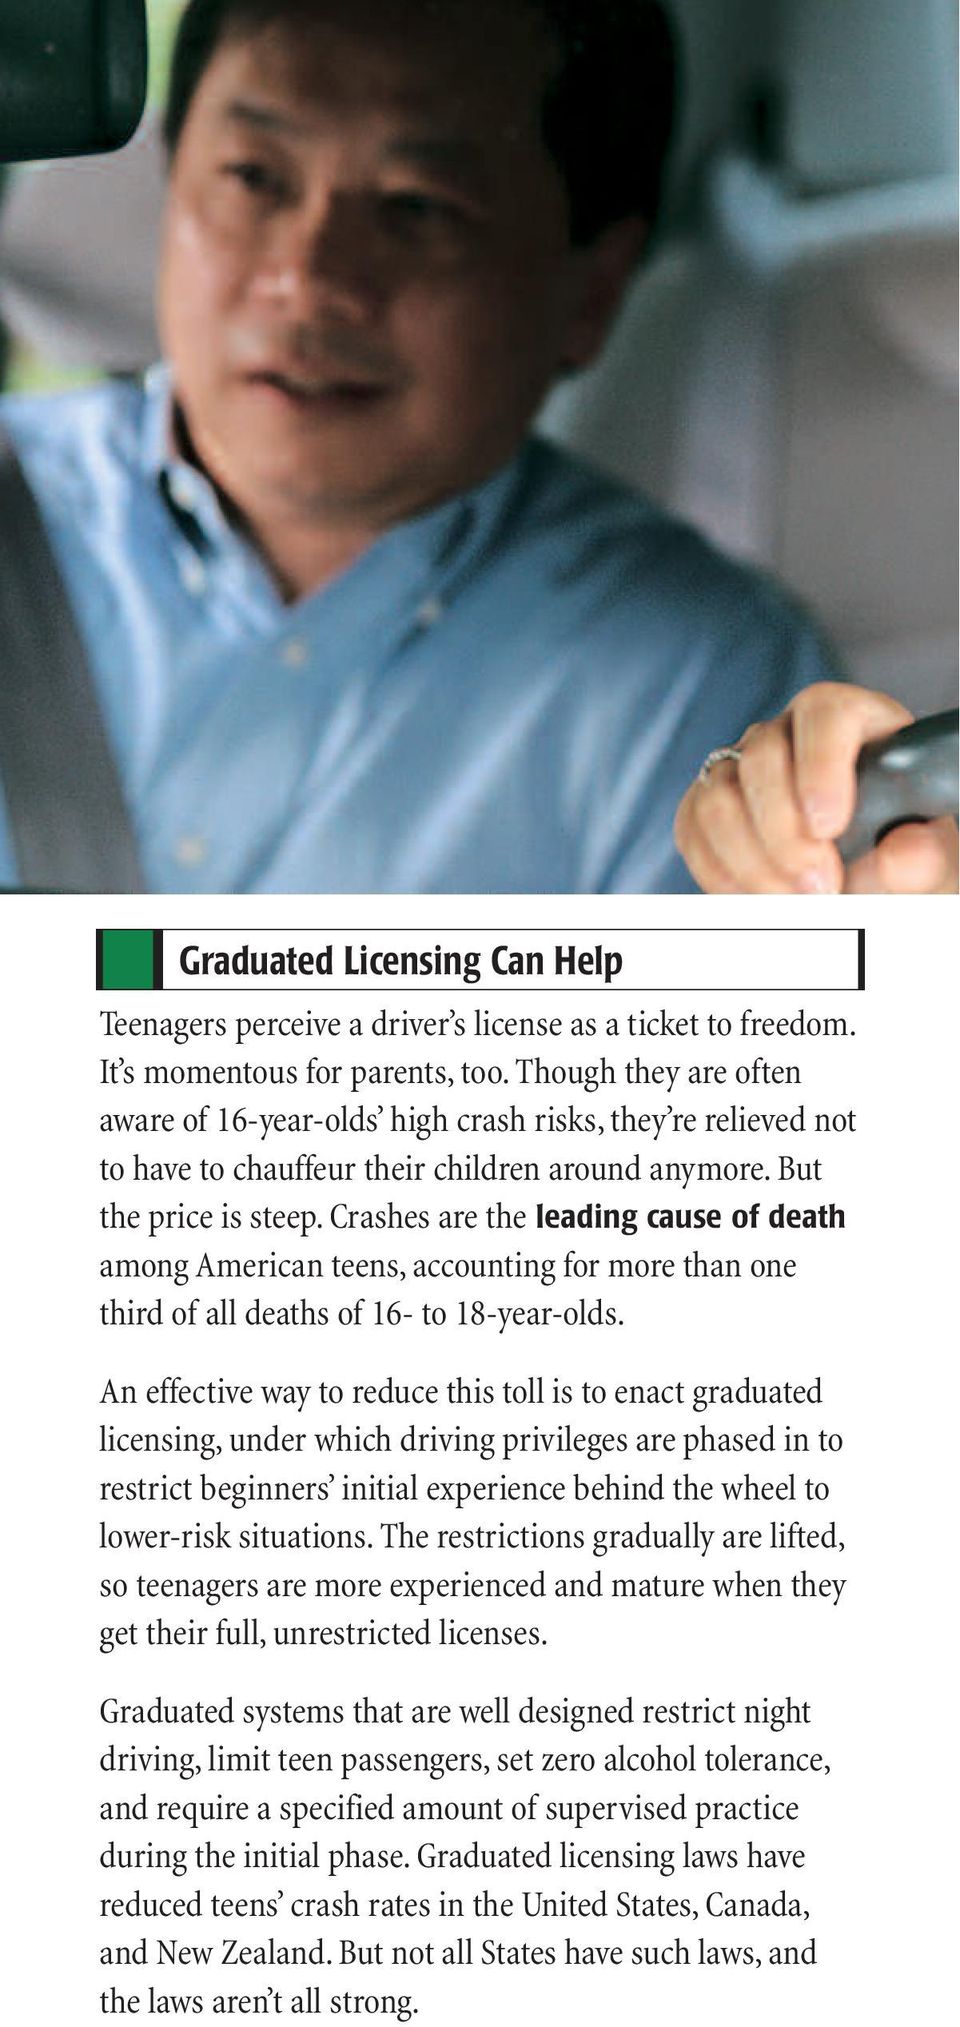 Crashes are the leading cause of death among American teens, accounting for more than one third of all deaths of 16- to 18-year-olds.